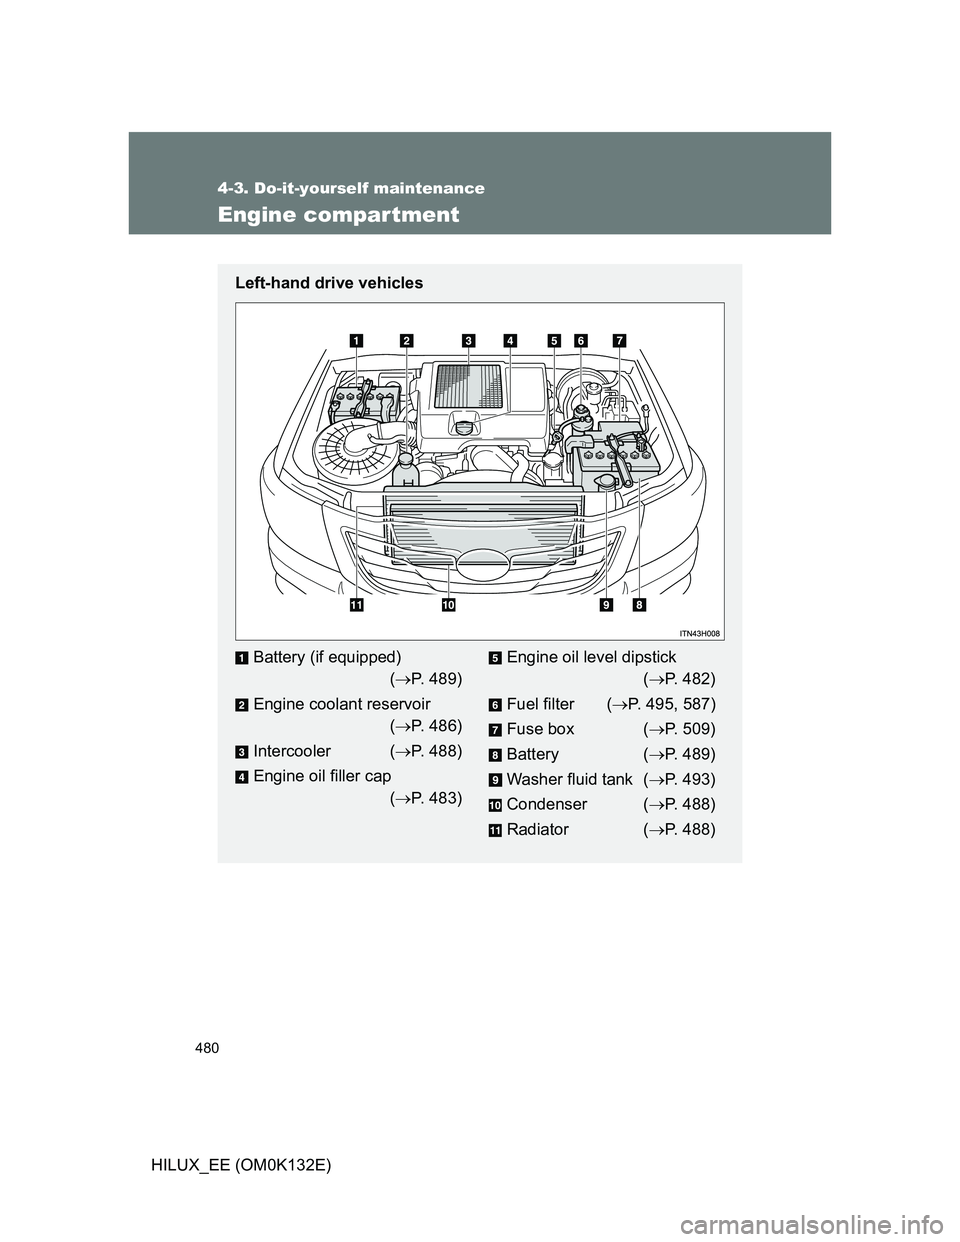 TOYOTA HILUX 2012  Owners Manual (in English) 480
4-3. Do-it-yourself maintenance
HILUX_EE (OM0K132E)
Engine compartment
Left-hand drive vehicles
Battery (if equipped) 
 (P. 489)
Engine coolant reservoir 
(P. 486)
Intercooler (P. 488)
En